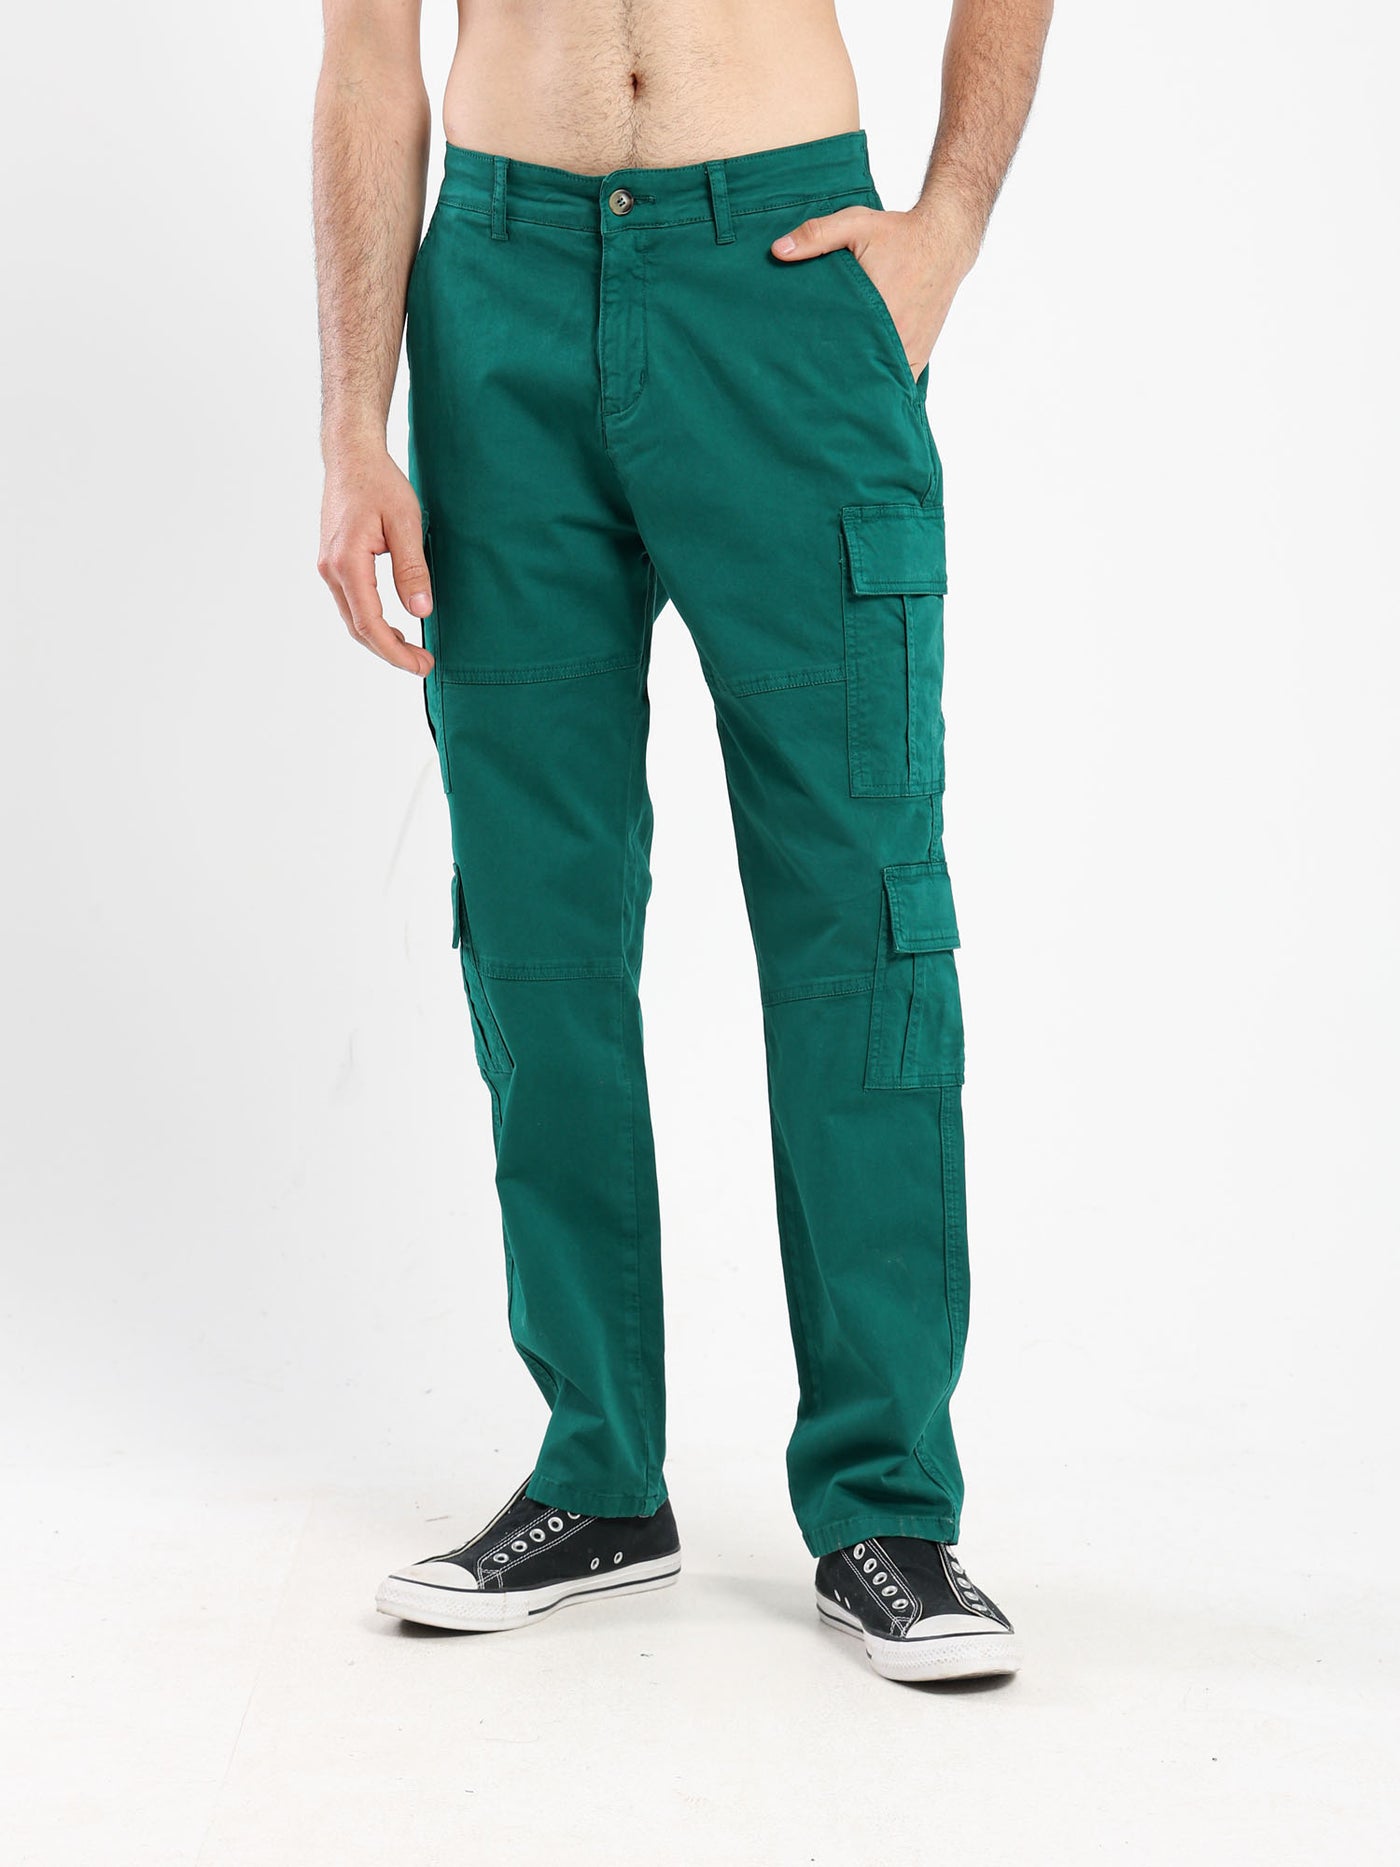 Jogger Pants - Cargo - Front Panel